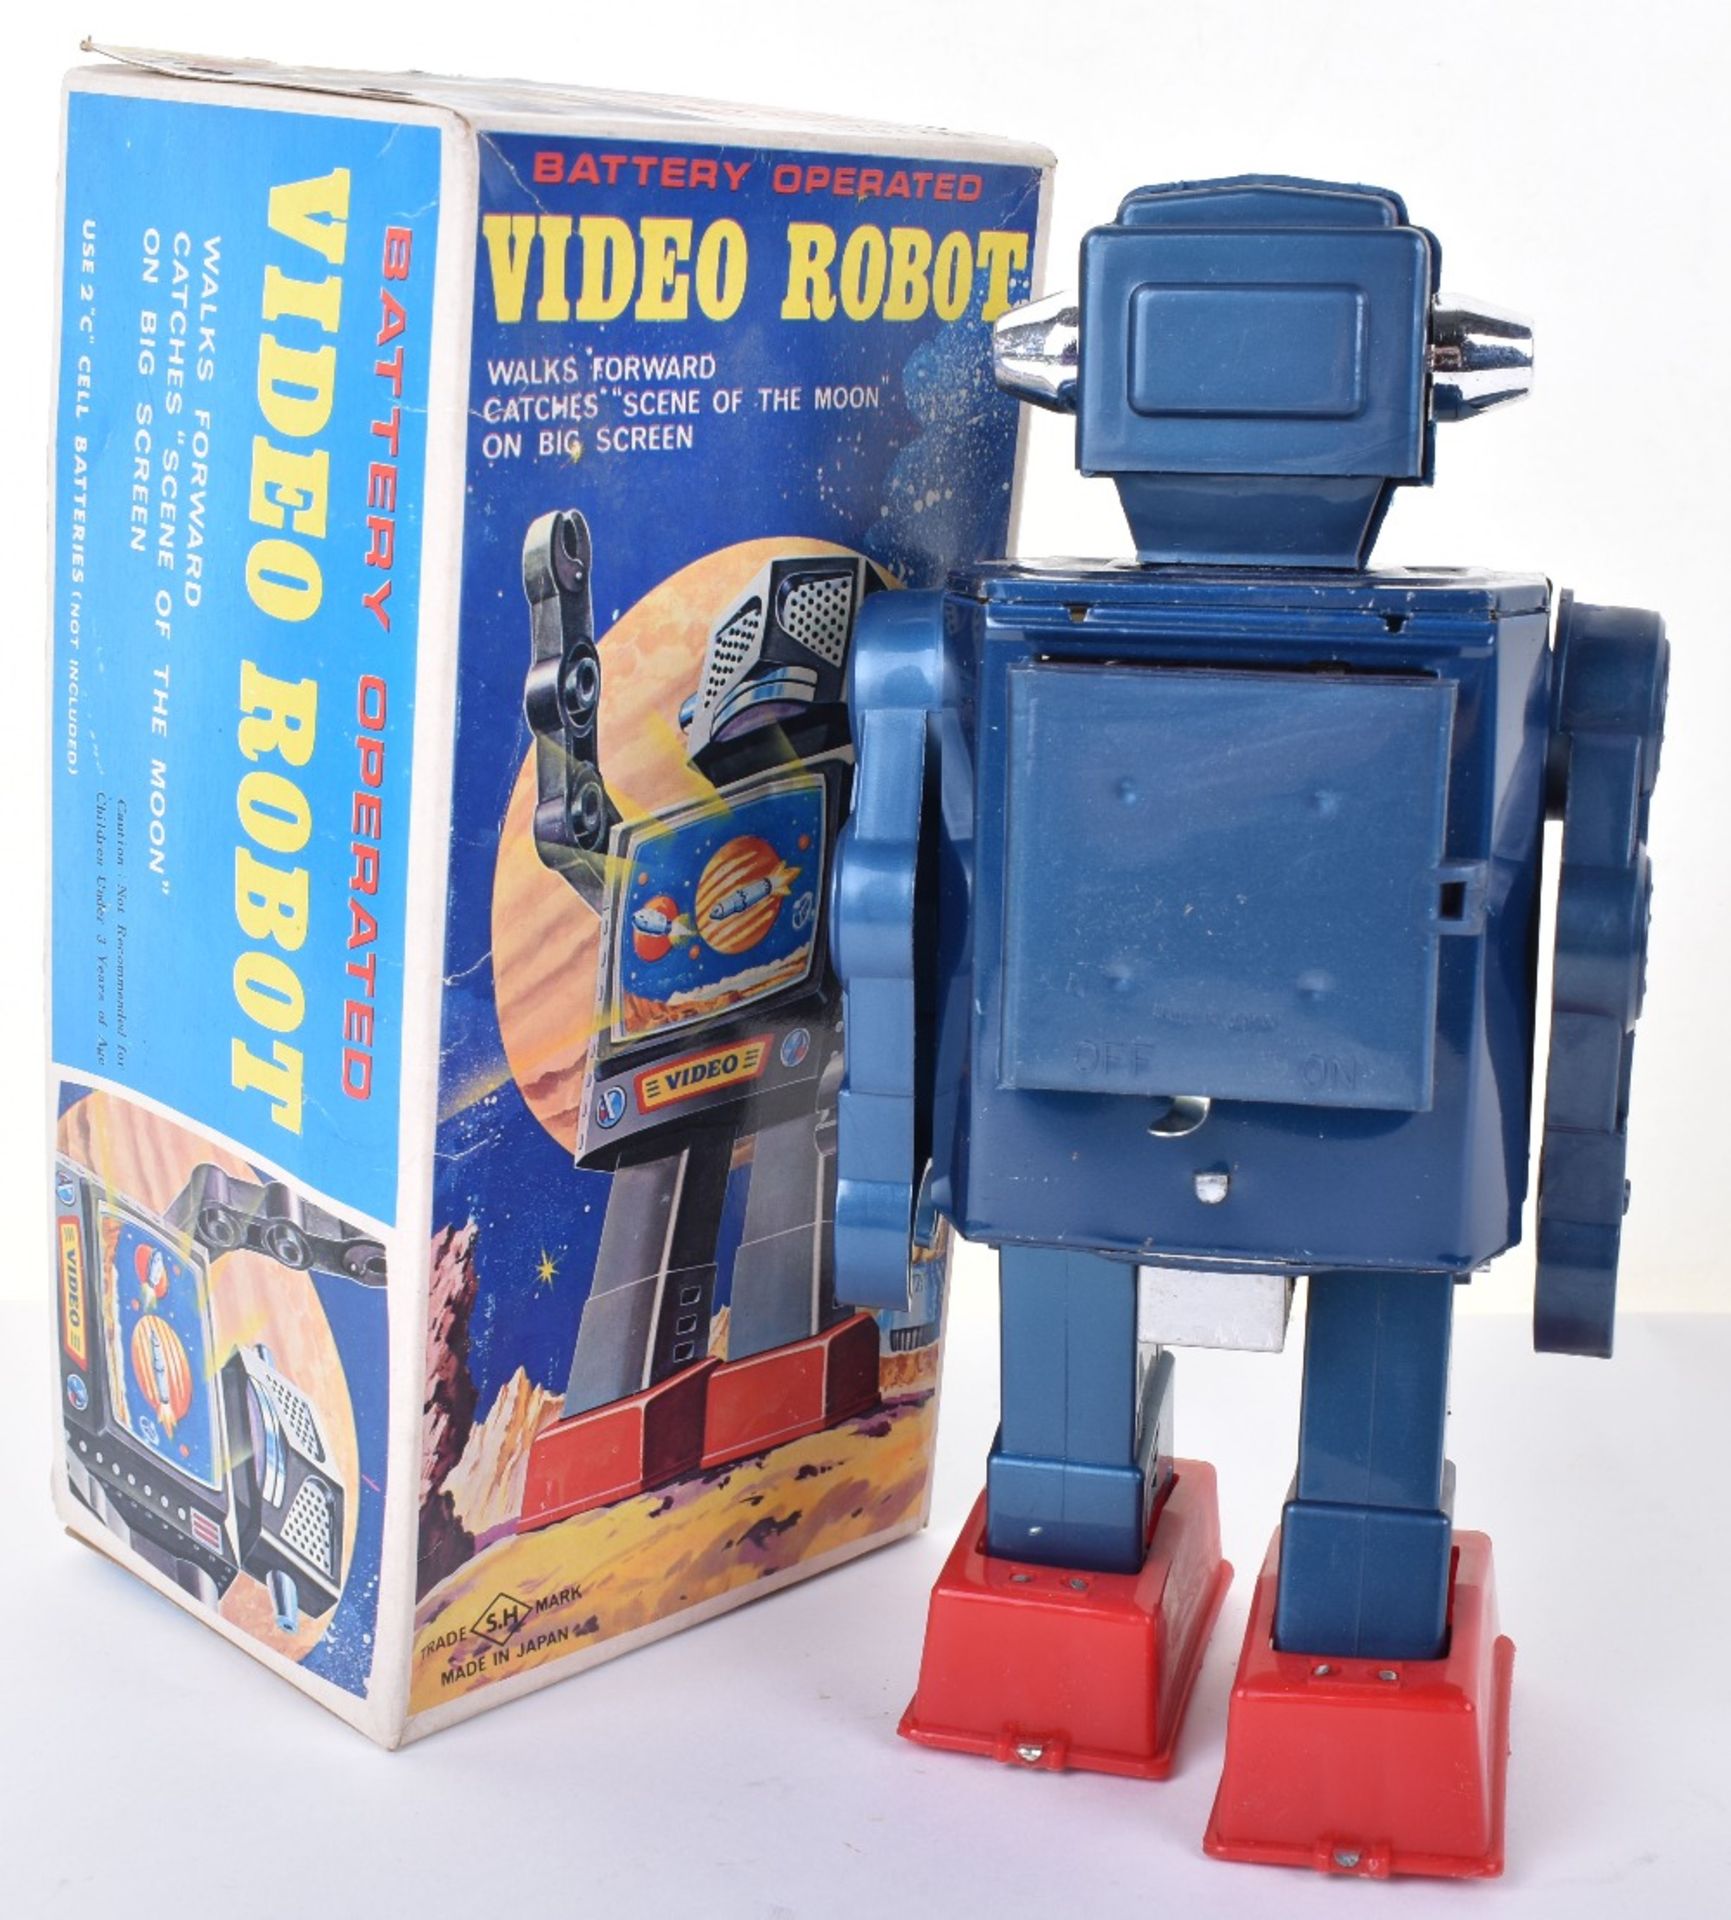 Horikawa boxed battery operated Video Robot, 1970s - Image 2 of 3